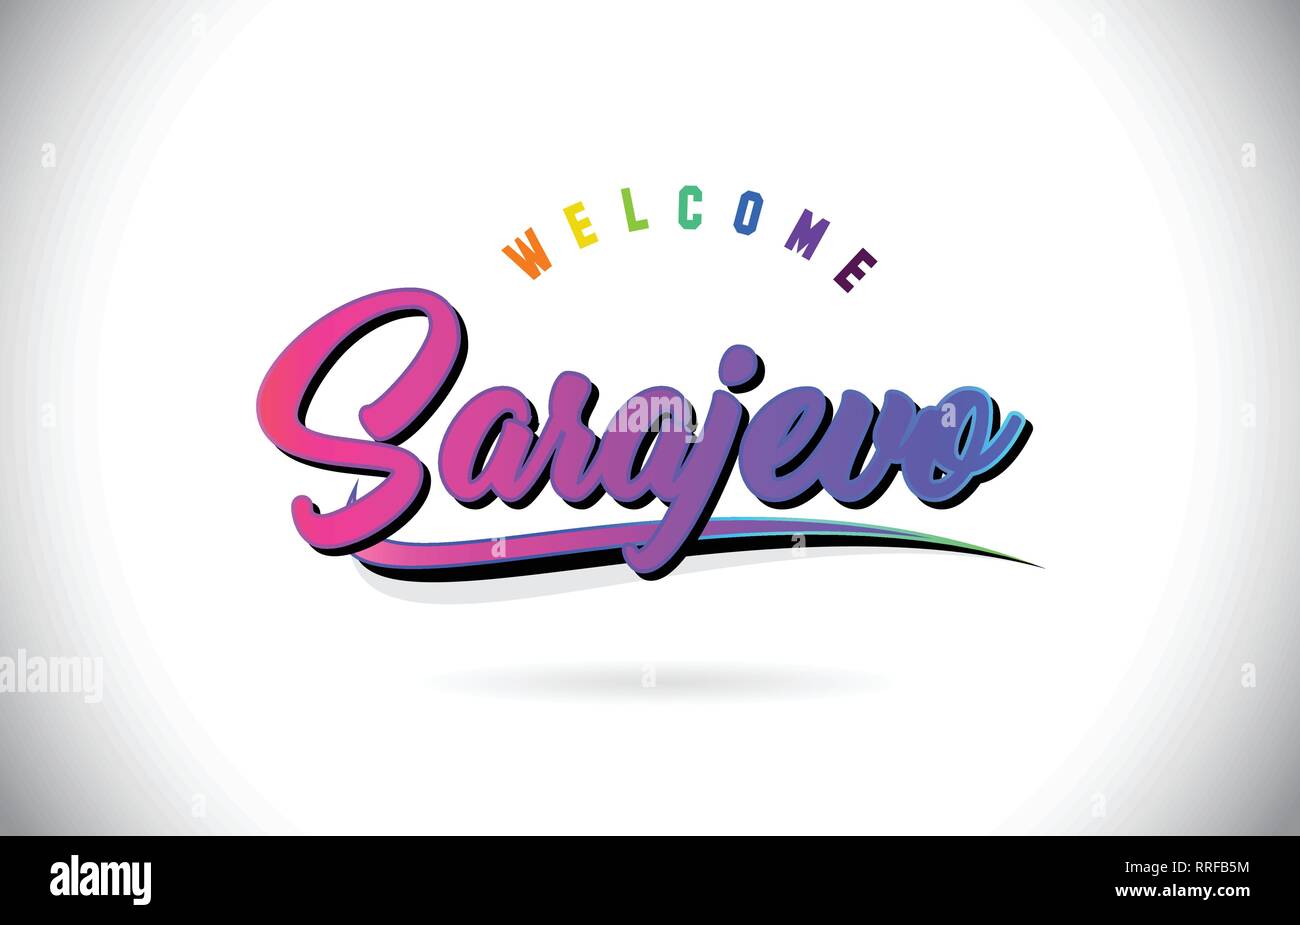 Sarajevo Welcome To Word Text with Creative Purple Pink Handwritten Font and Swoosh Shape Design Vector Illustration. Stock Vector